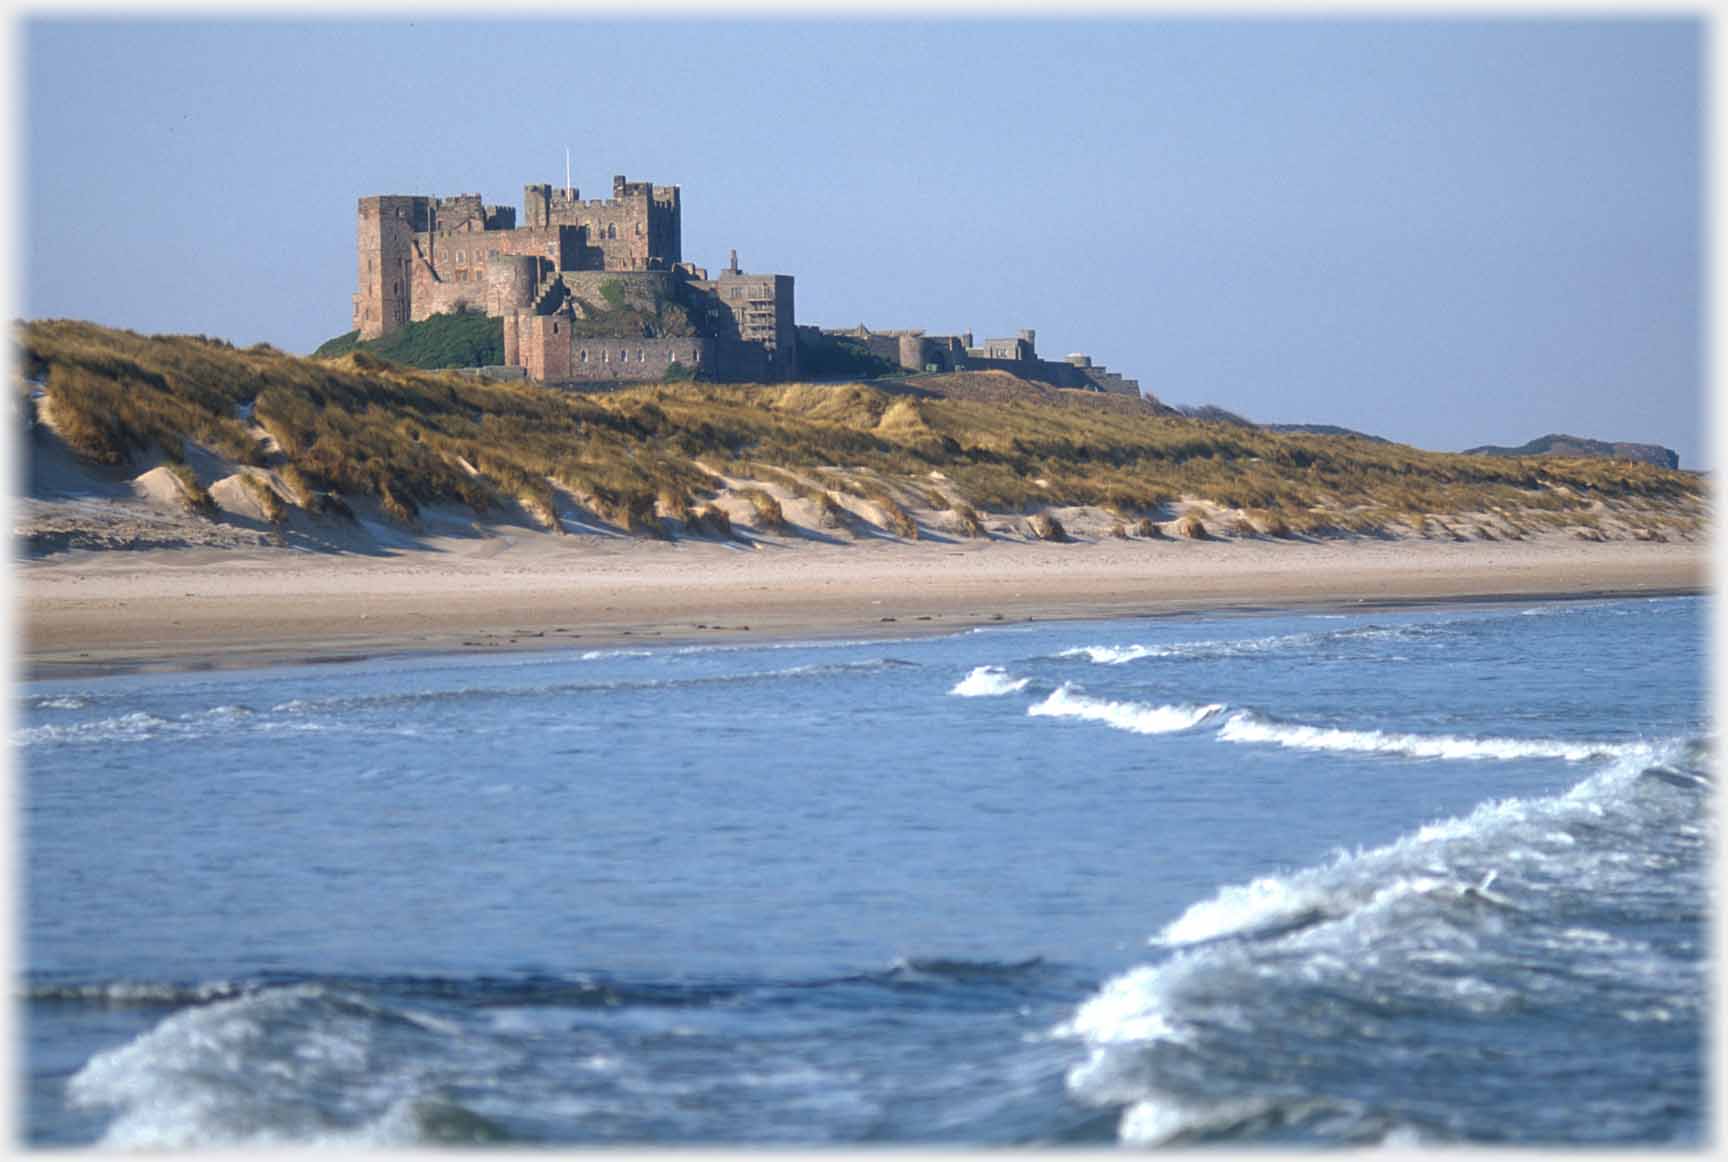 Sea, shore line and castle behind.